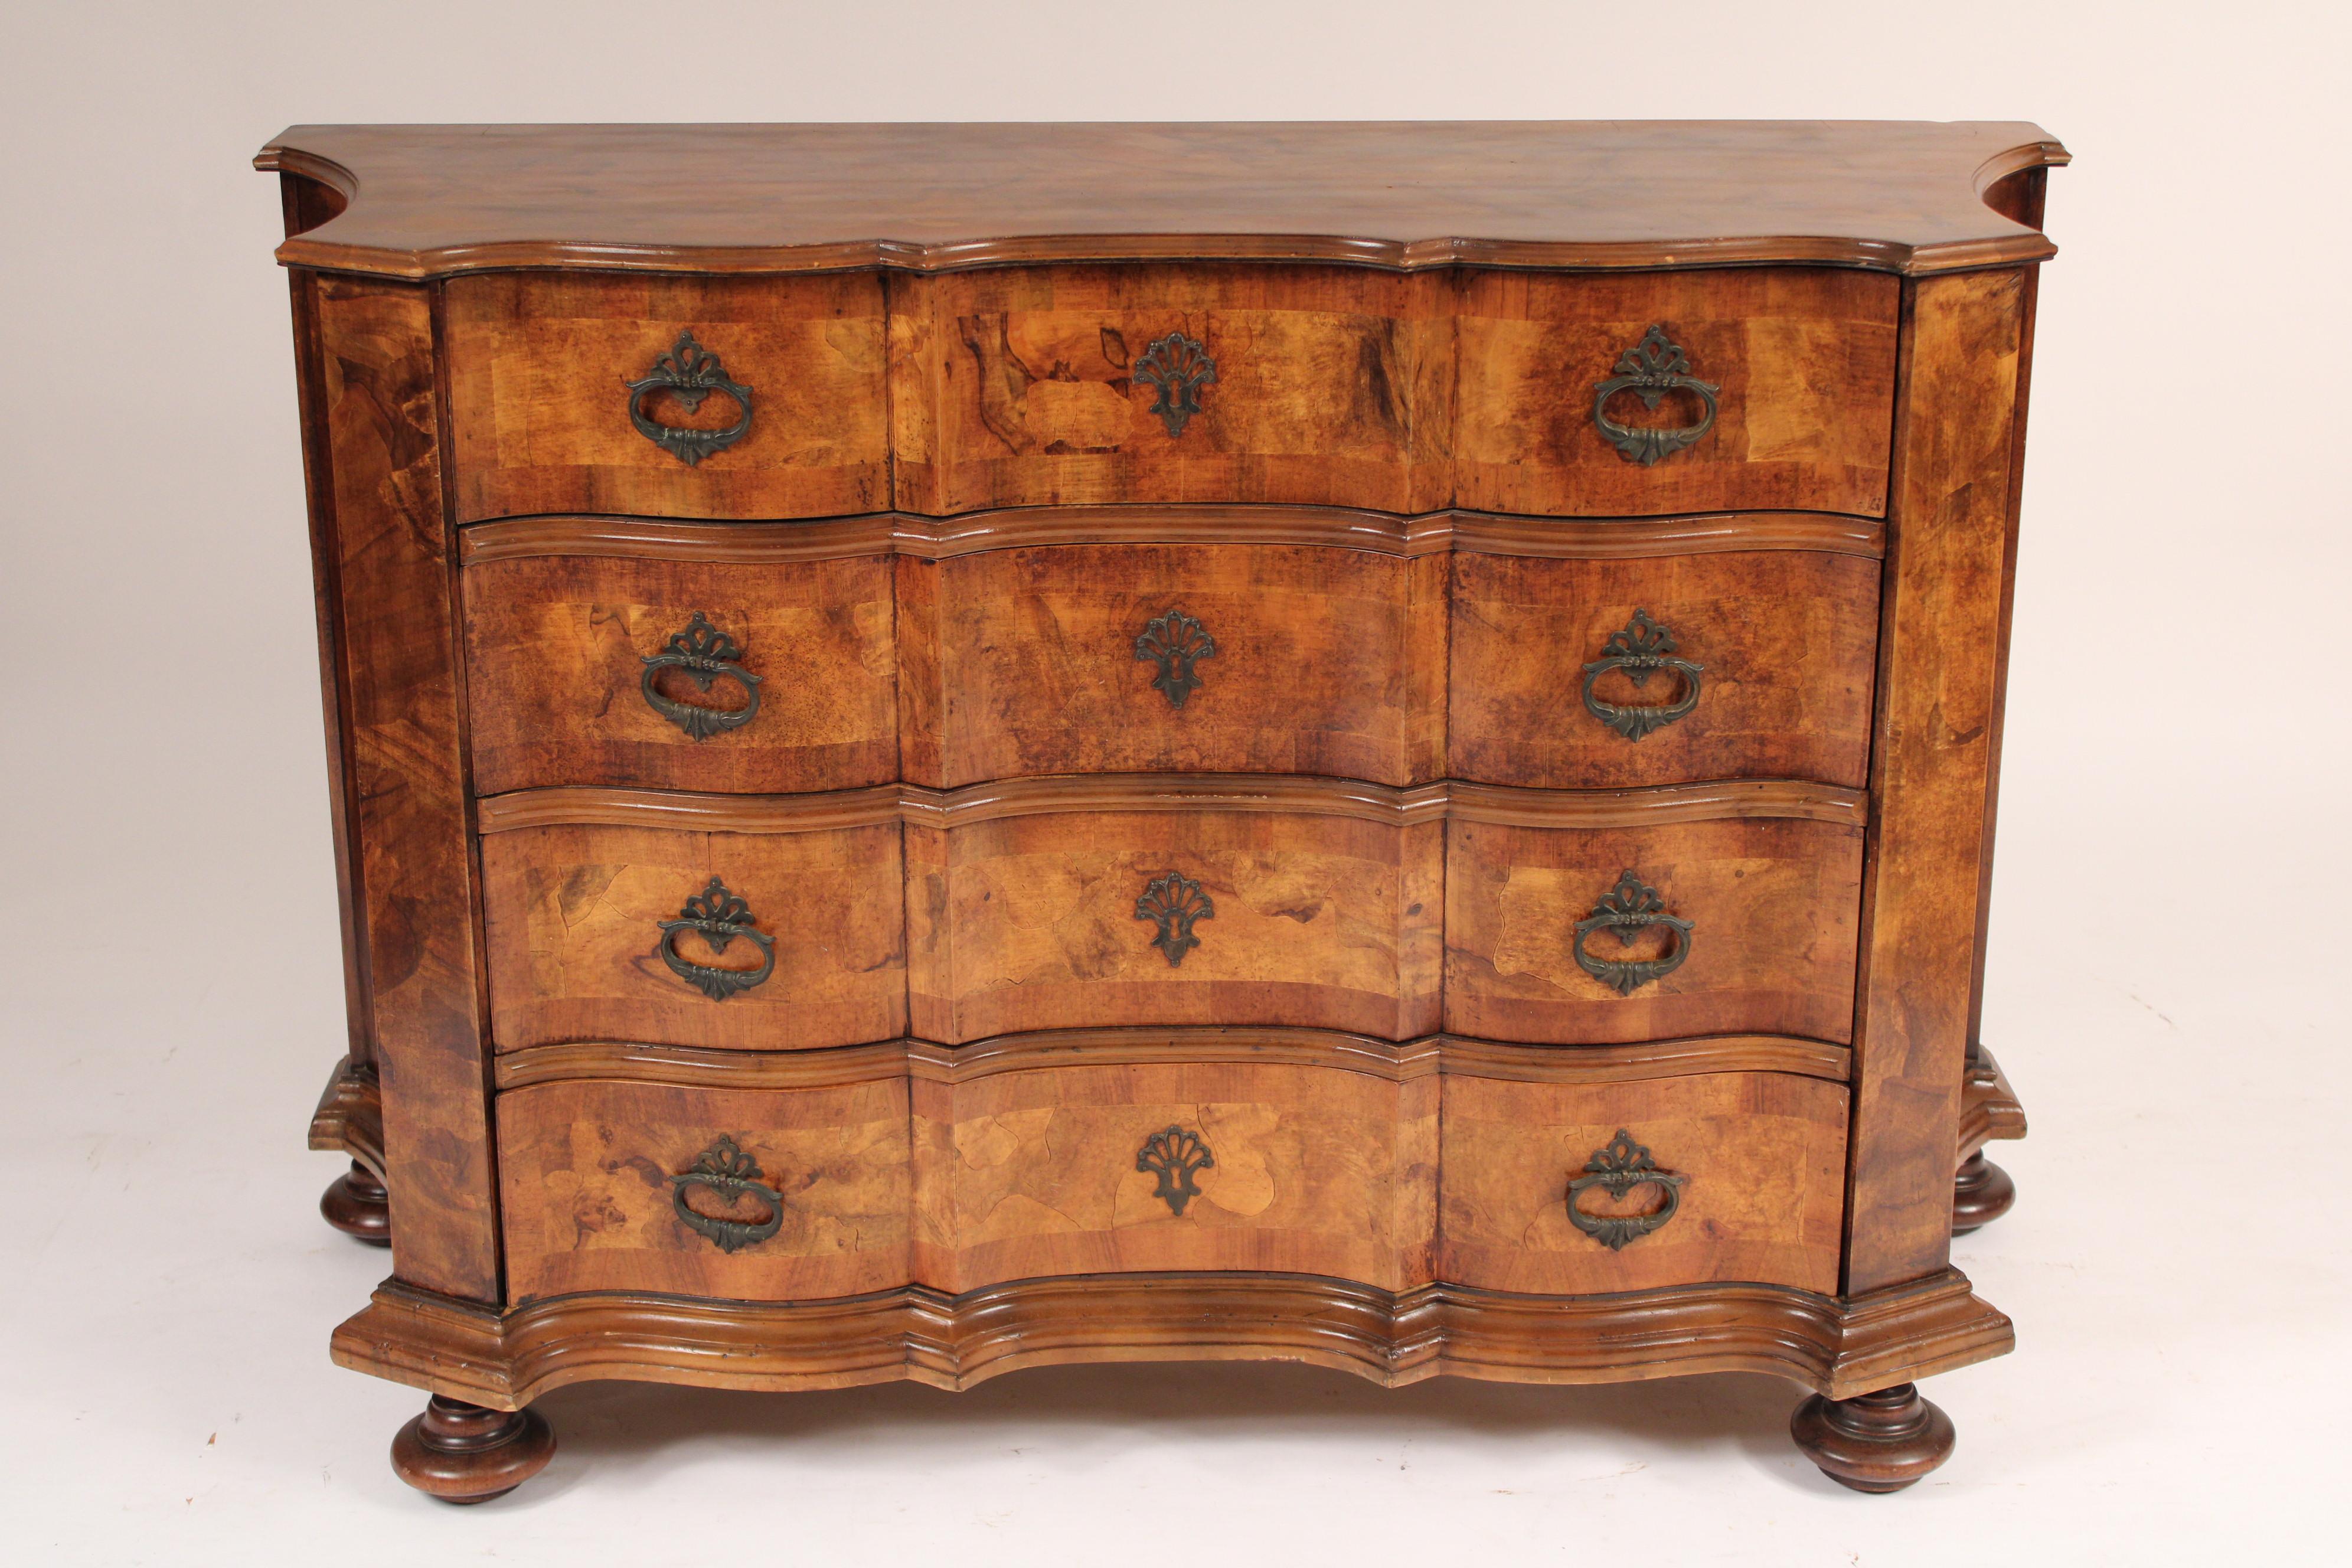 Italian baroque style olive wood chest of drawers, circa mid 20th century. With a double serpentine shaped overhanging top, 4 nicely figured olive wood drawers with bronze hardware, concave shaped sides,  resting on bun feet. 